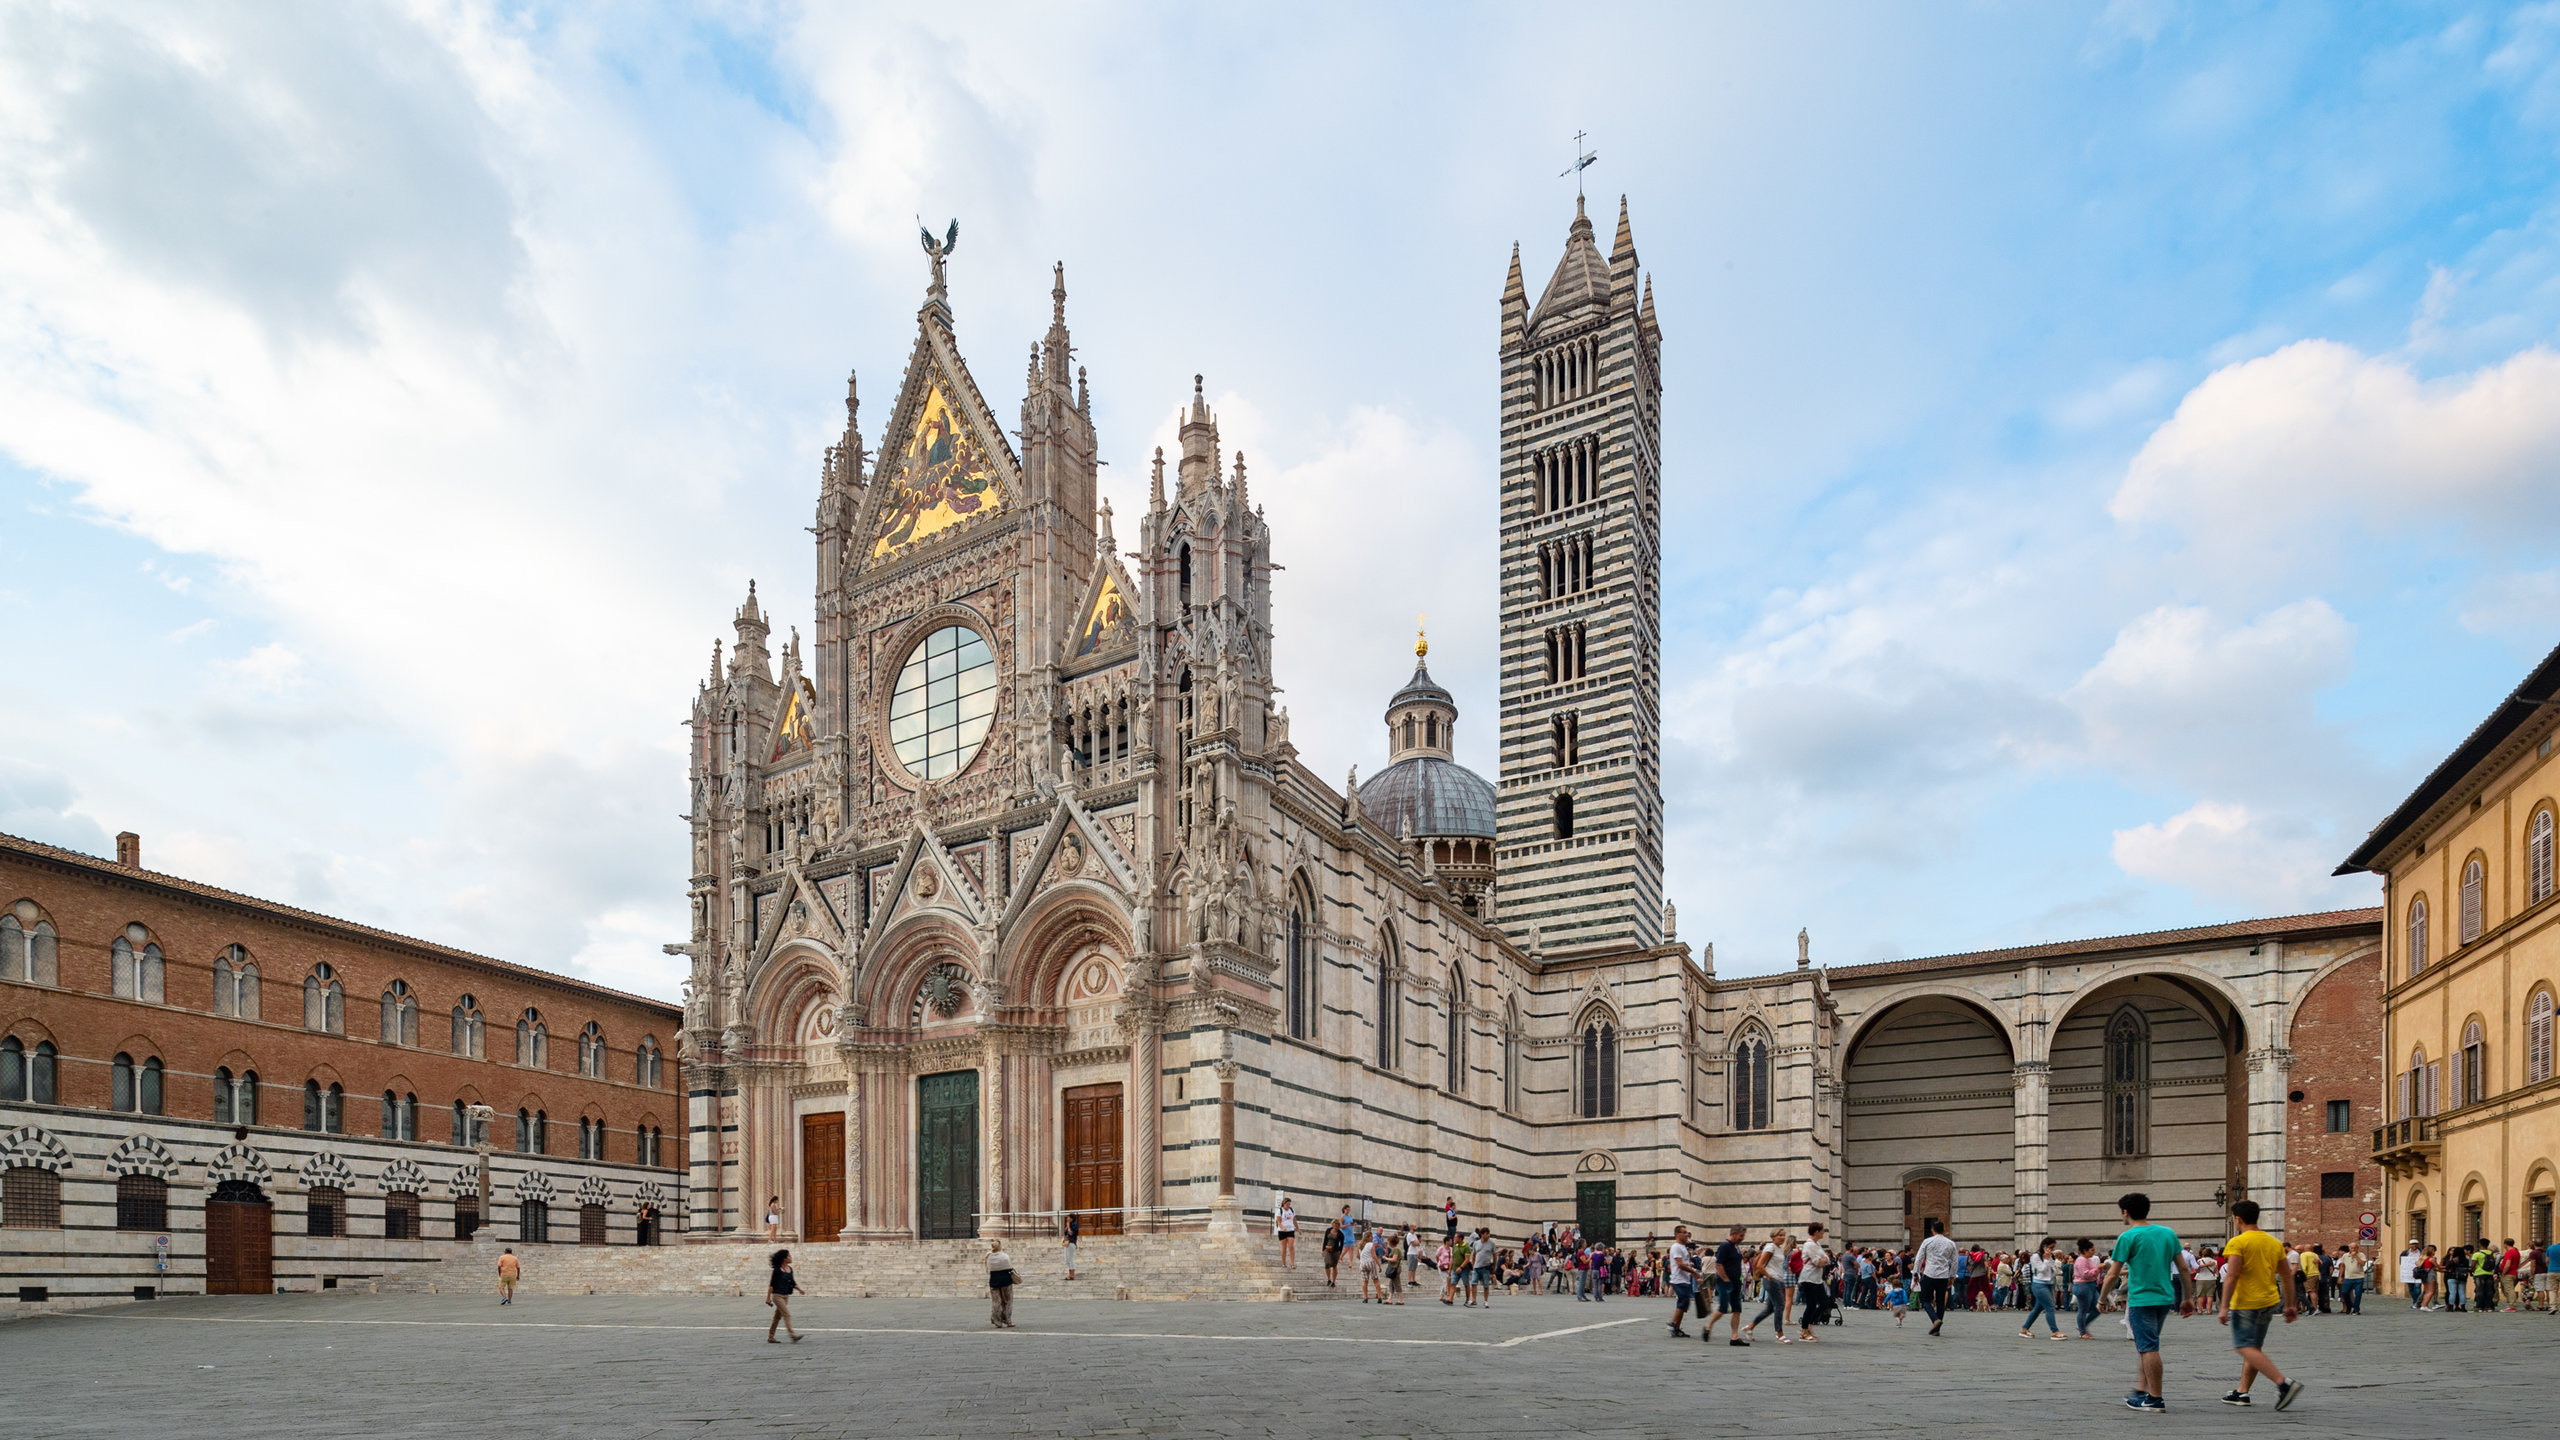 Siena Cathedral, Charming vacation rental, Home away from home, VRBO listing, 2560x1440 HD Desktop